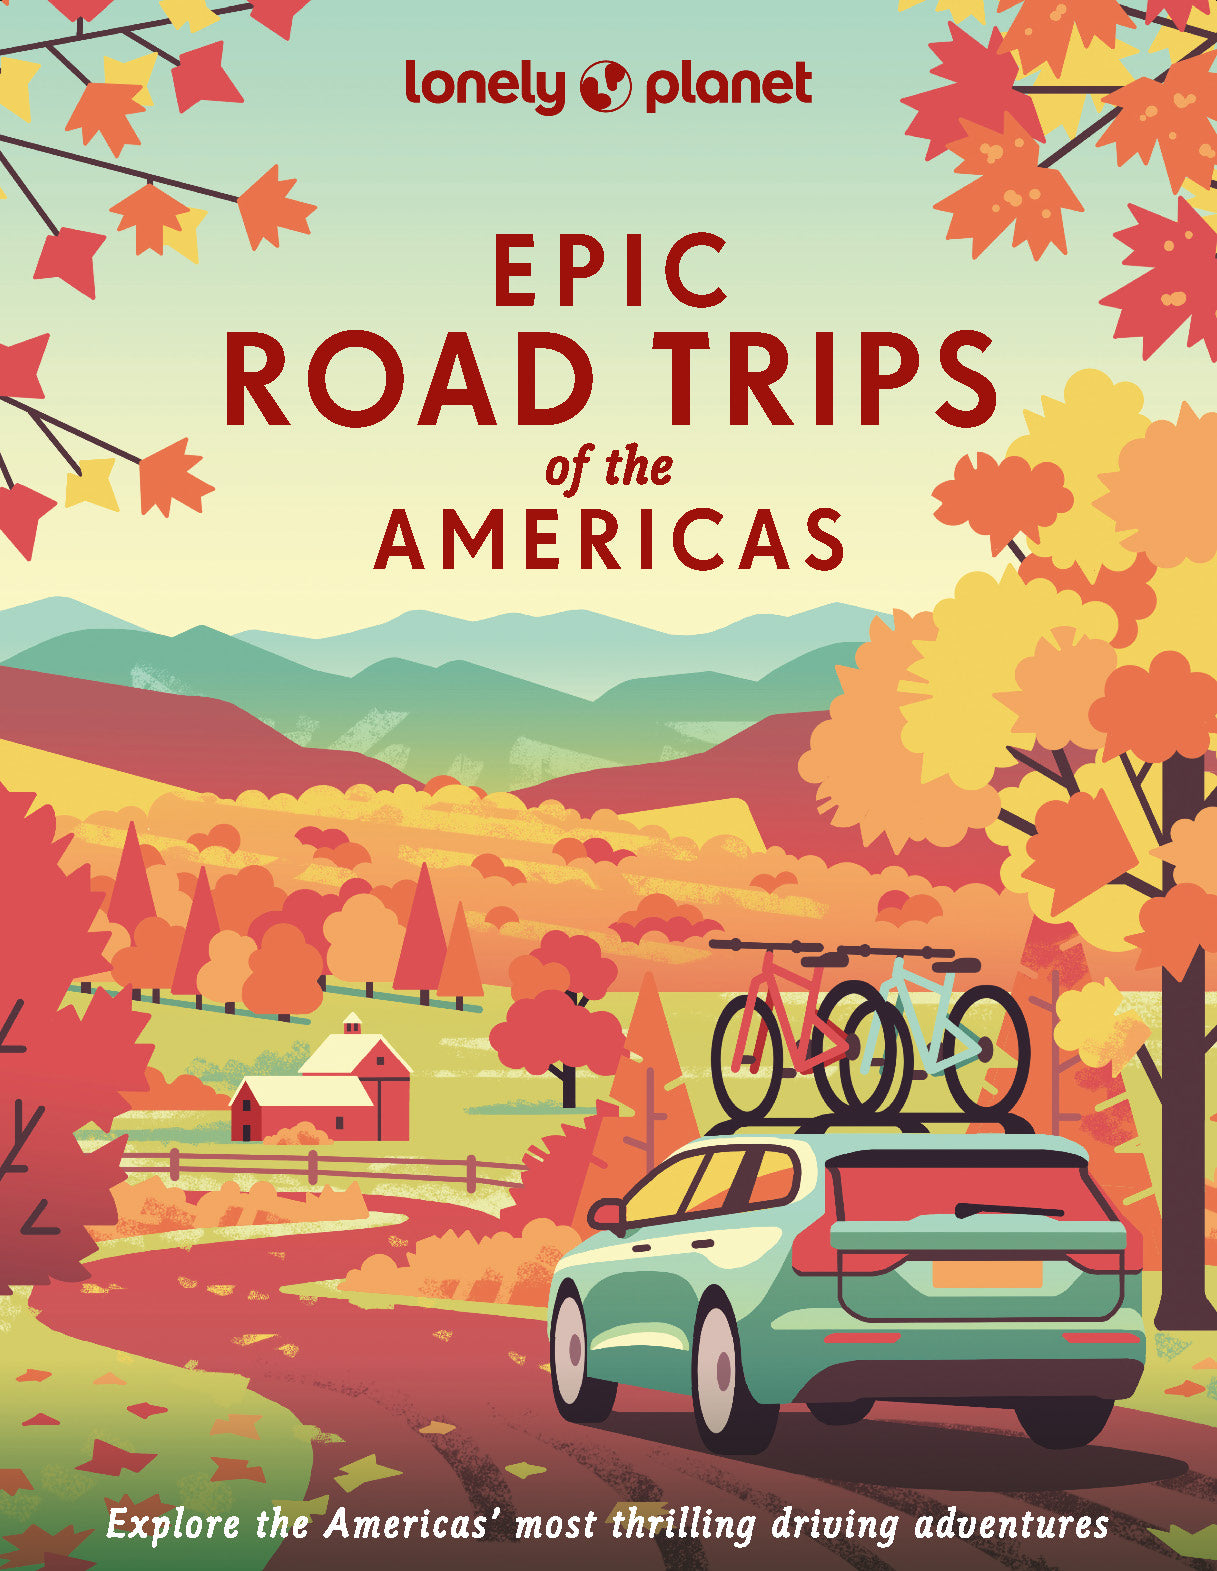 epic-road-trips-americas-lonely-planet